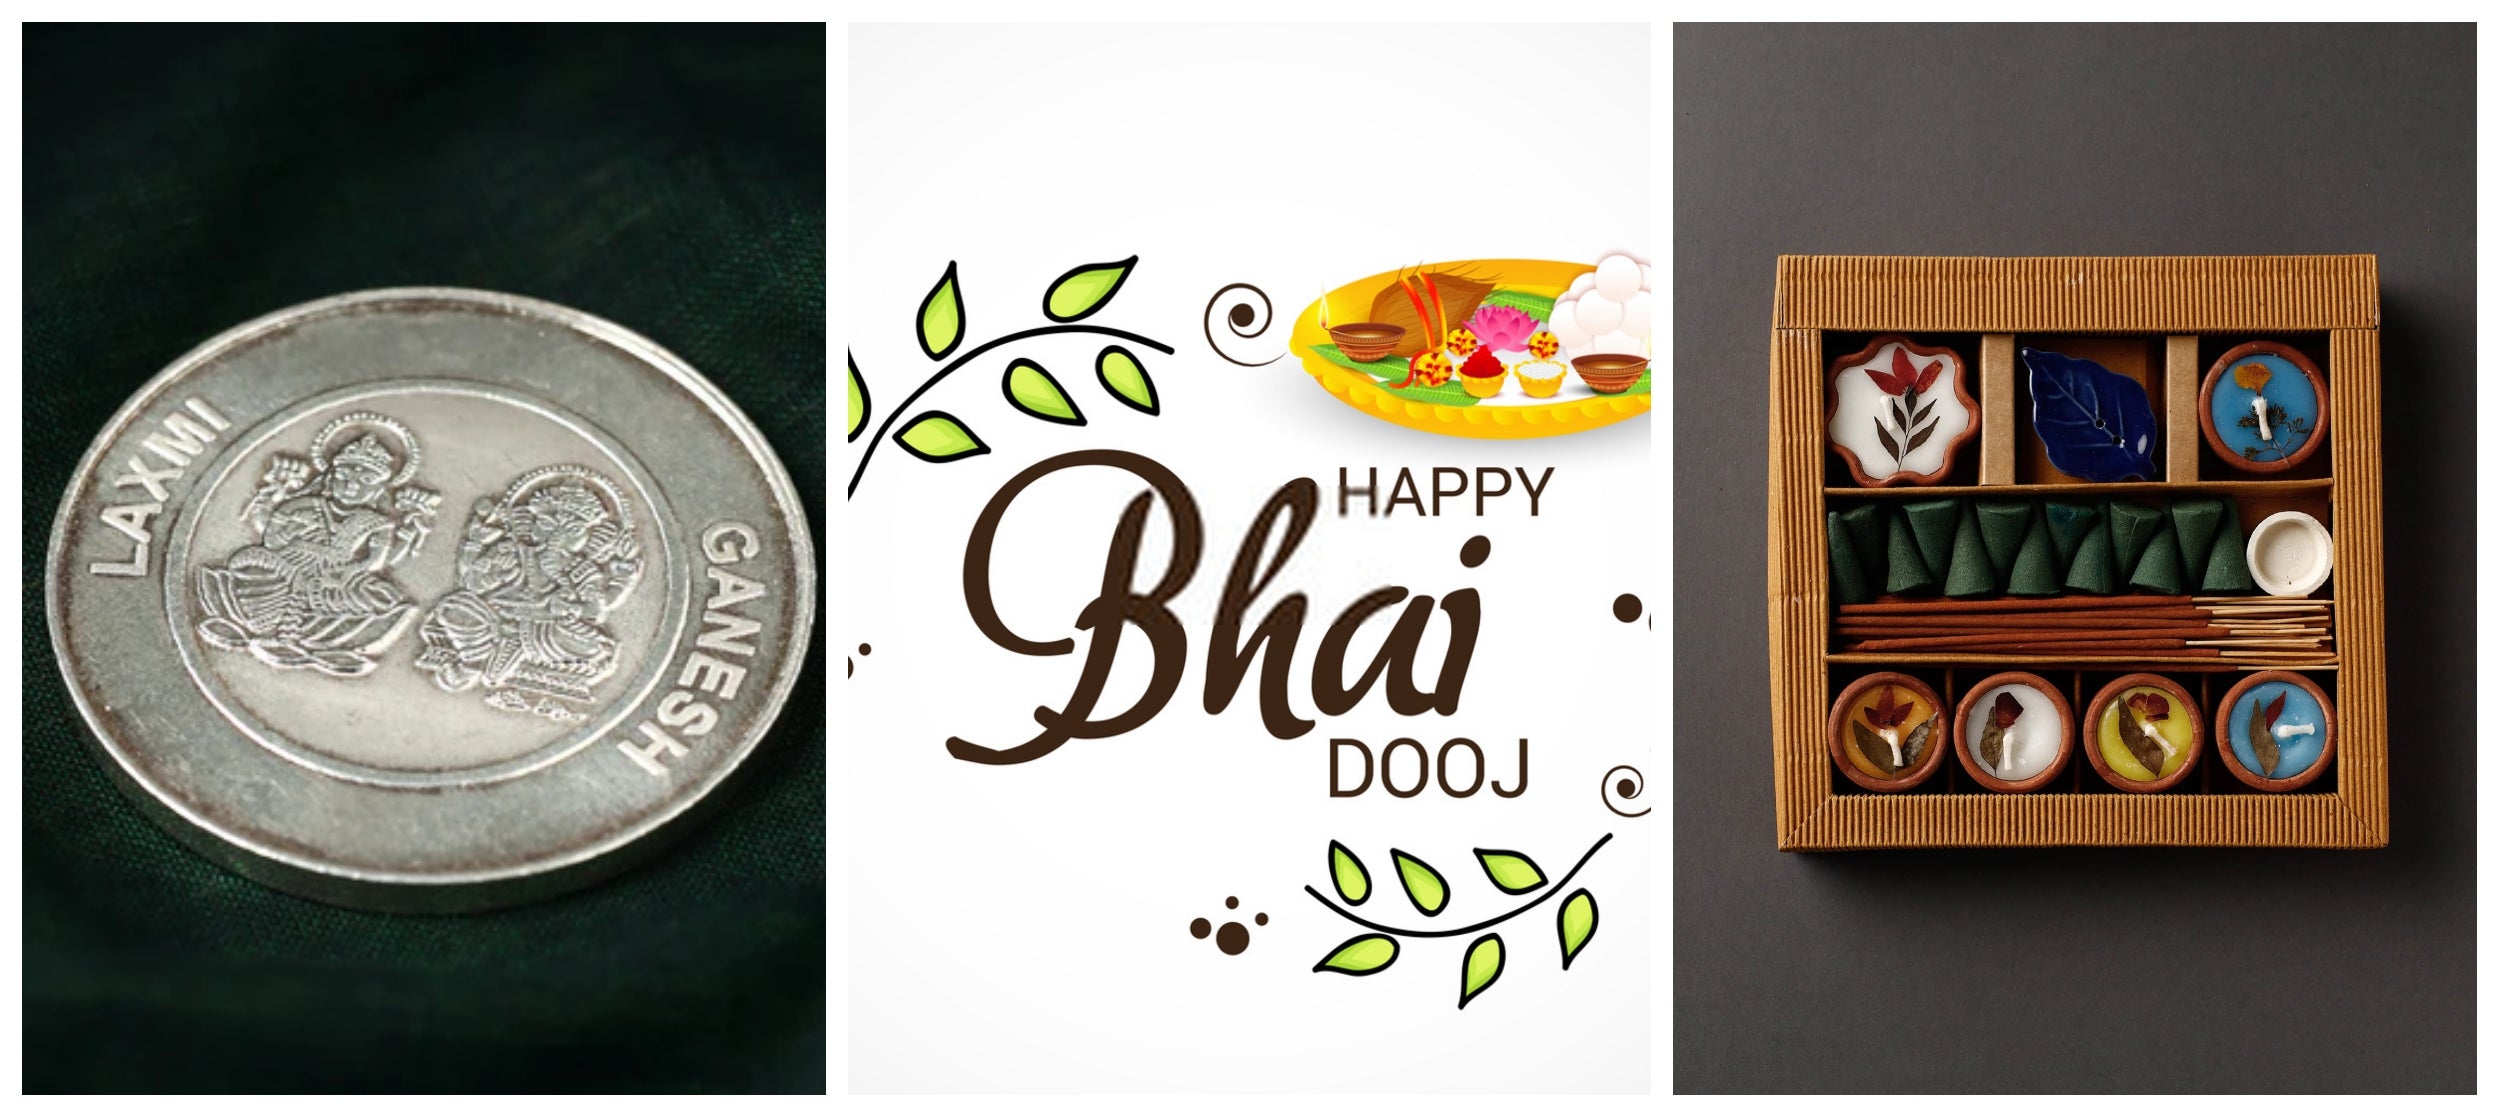 Bhai Dooj Gift Set for Brother Sister Chocolates Gift, Frooty Mango Juice,  Roli Chawal and Moli Thread Box Diwali Gifts for Family and Friends  Corporate Staff Clients - Diwali Gift Hampers :